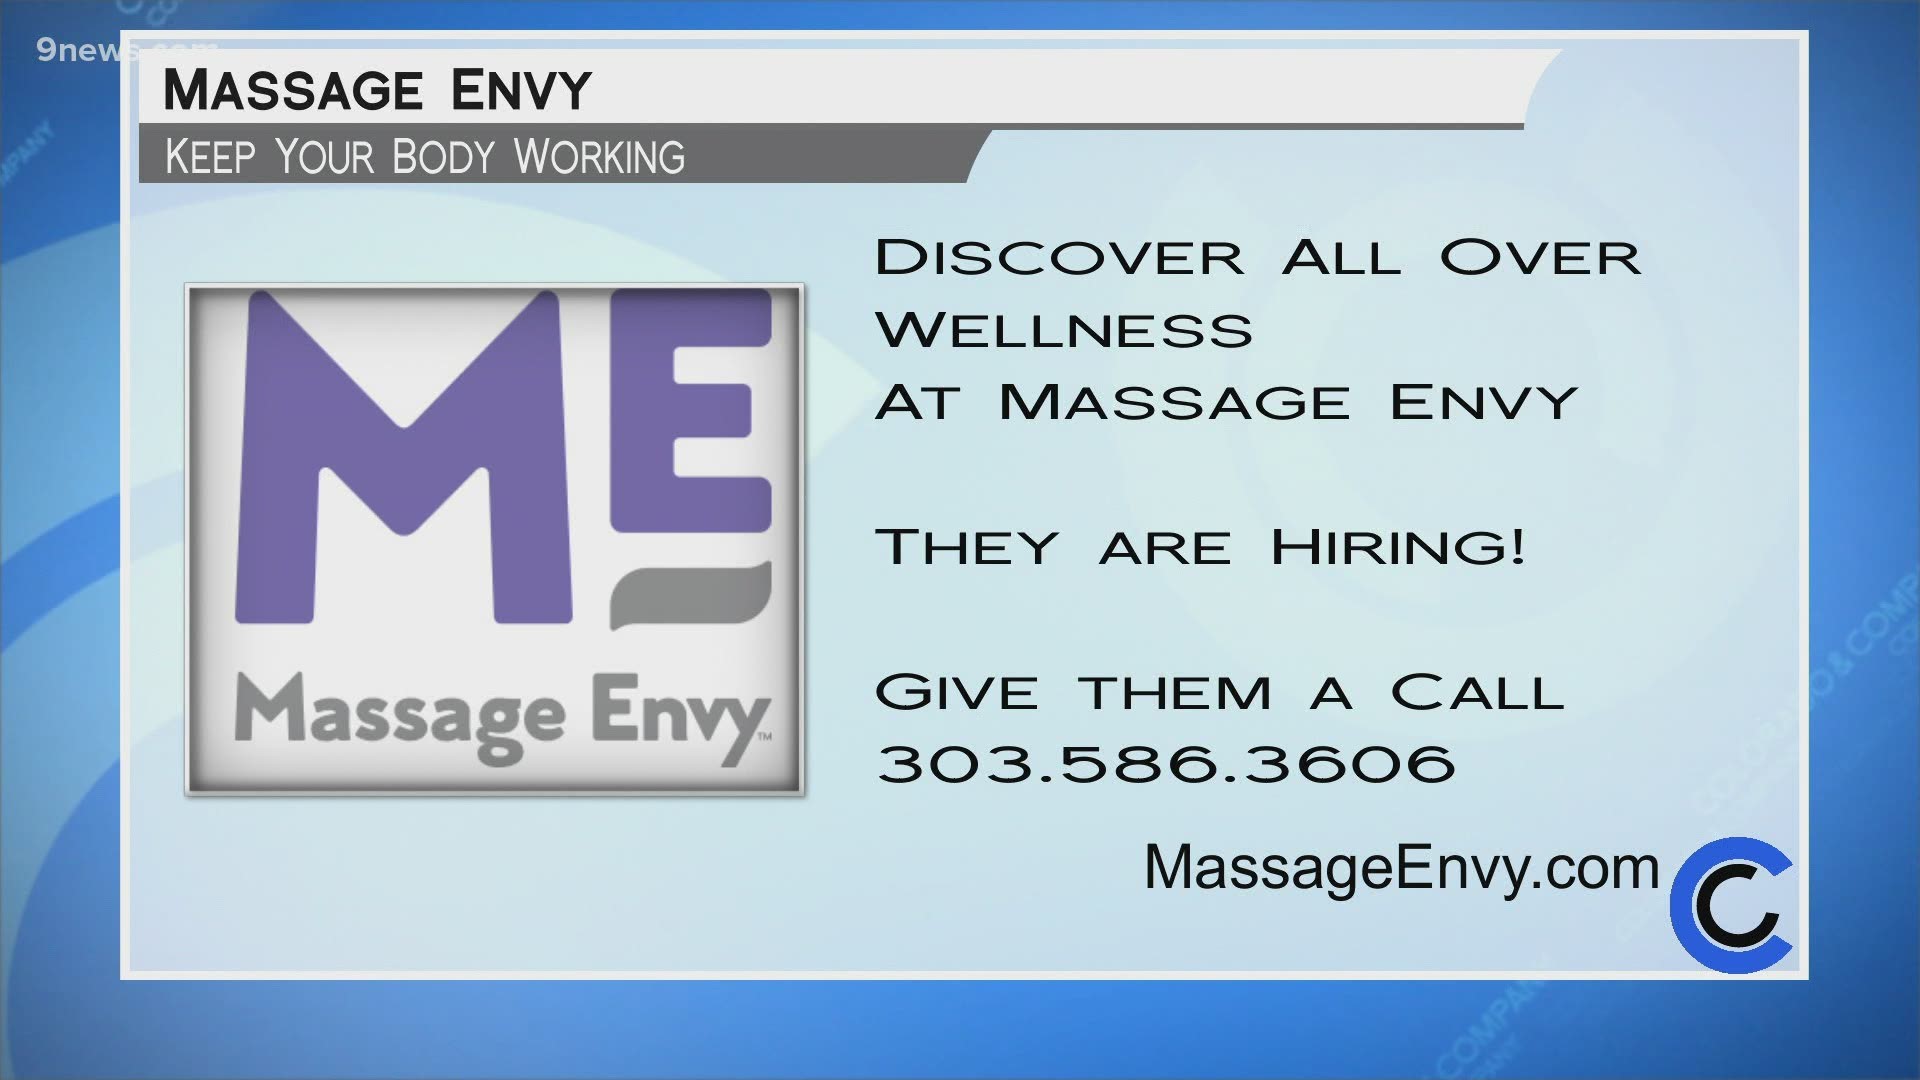 Get back to feeling good with help from Massage Envy. Learn more at MassageEnvy.com. They're also hiring! Text 303.586.3606 to find out more.